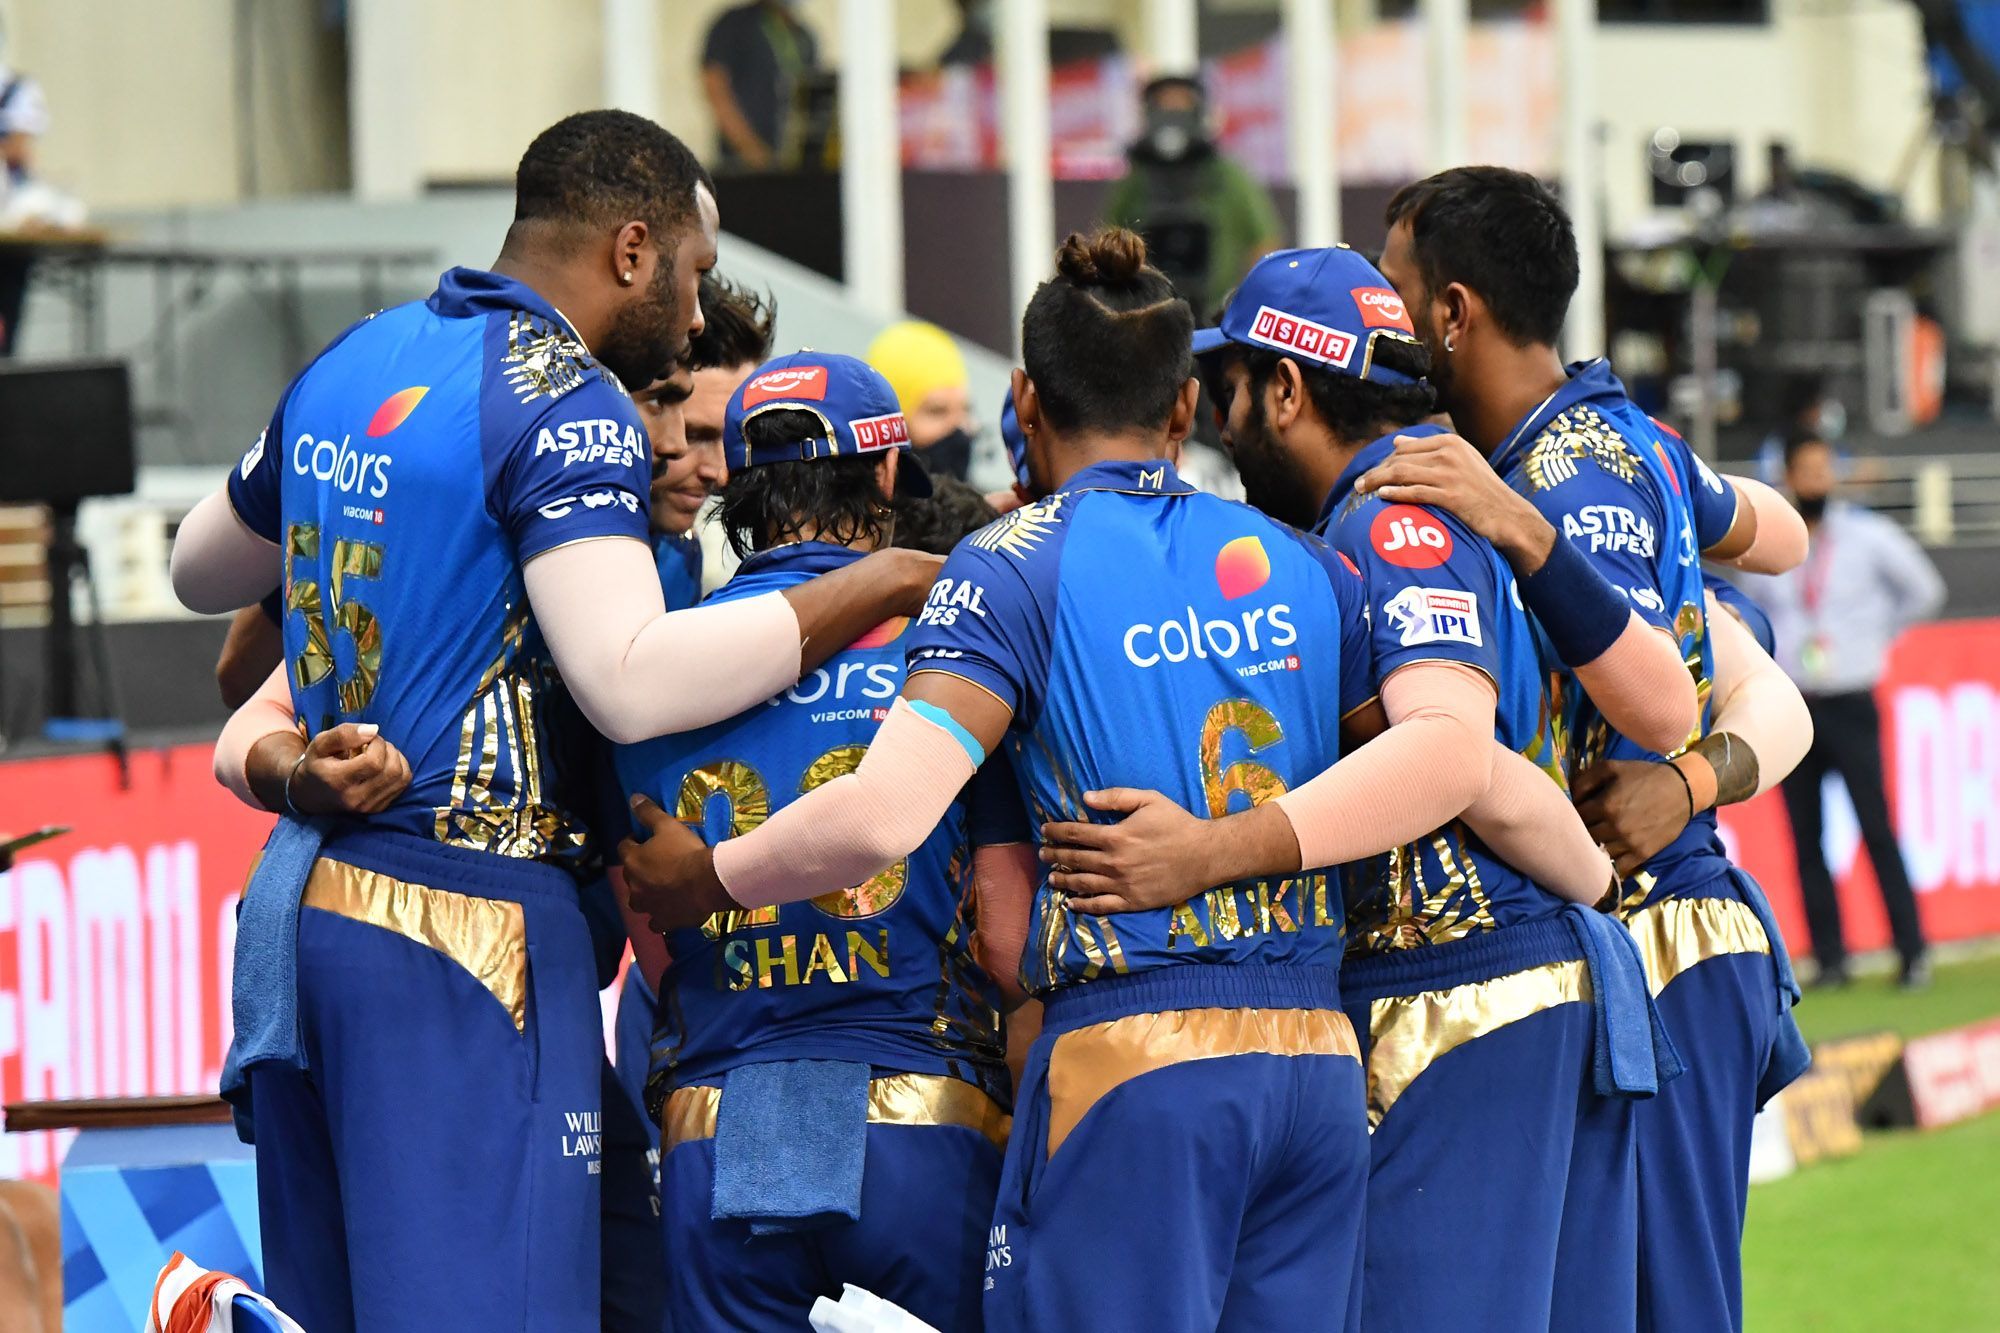 MI have been ruthless in their single-minded approach of winning their 5th IPL title | BCCI/IPL